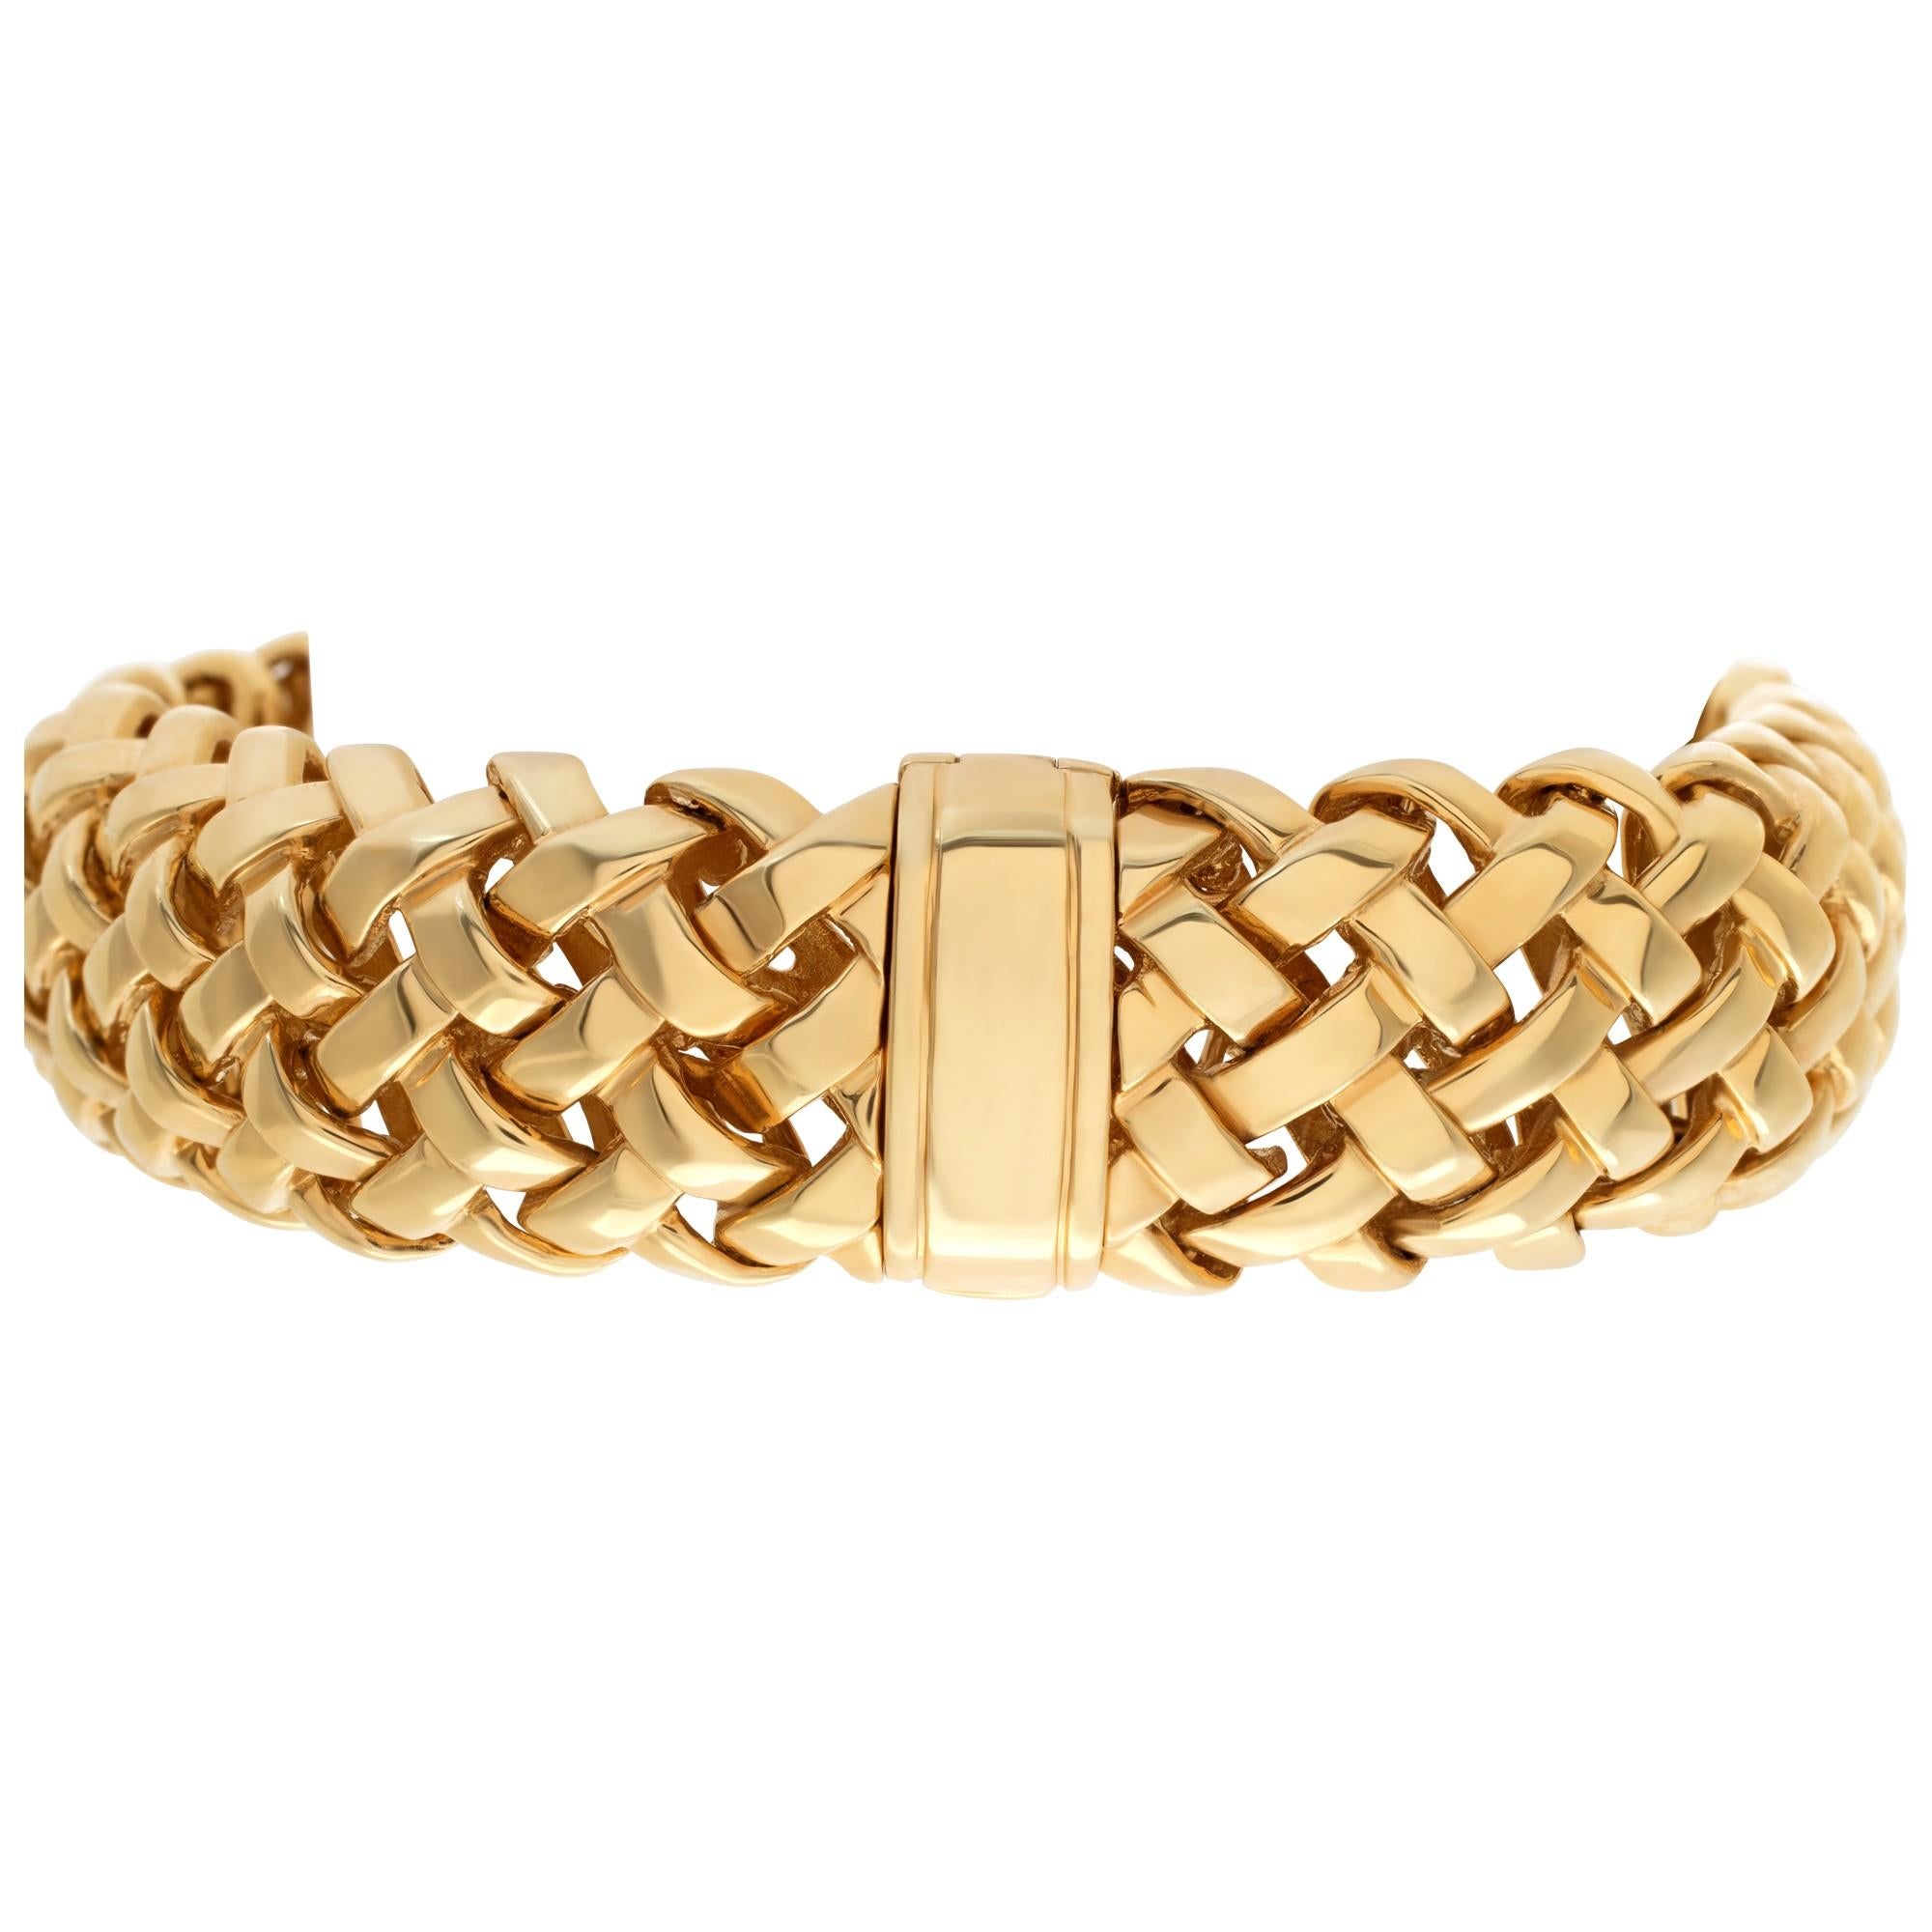 Modern Tiffany & Co. Vannerie Collection Bracelet in 18K Yellow Gold and Diamonds